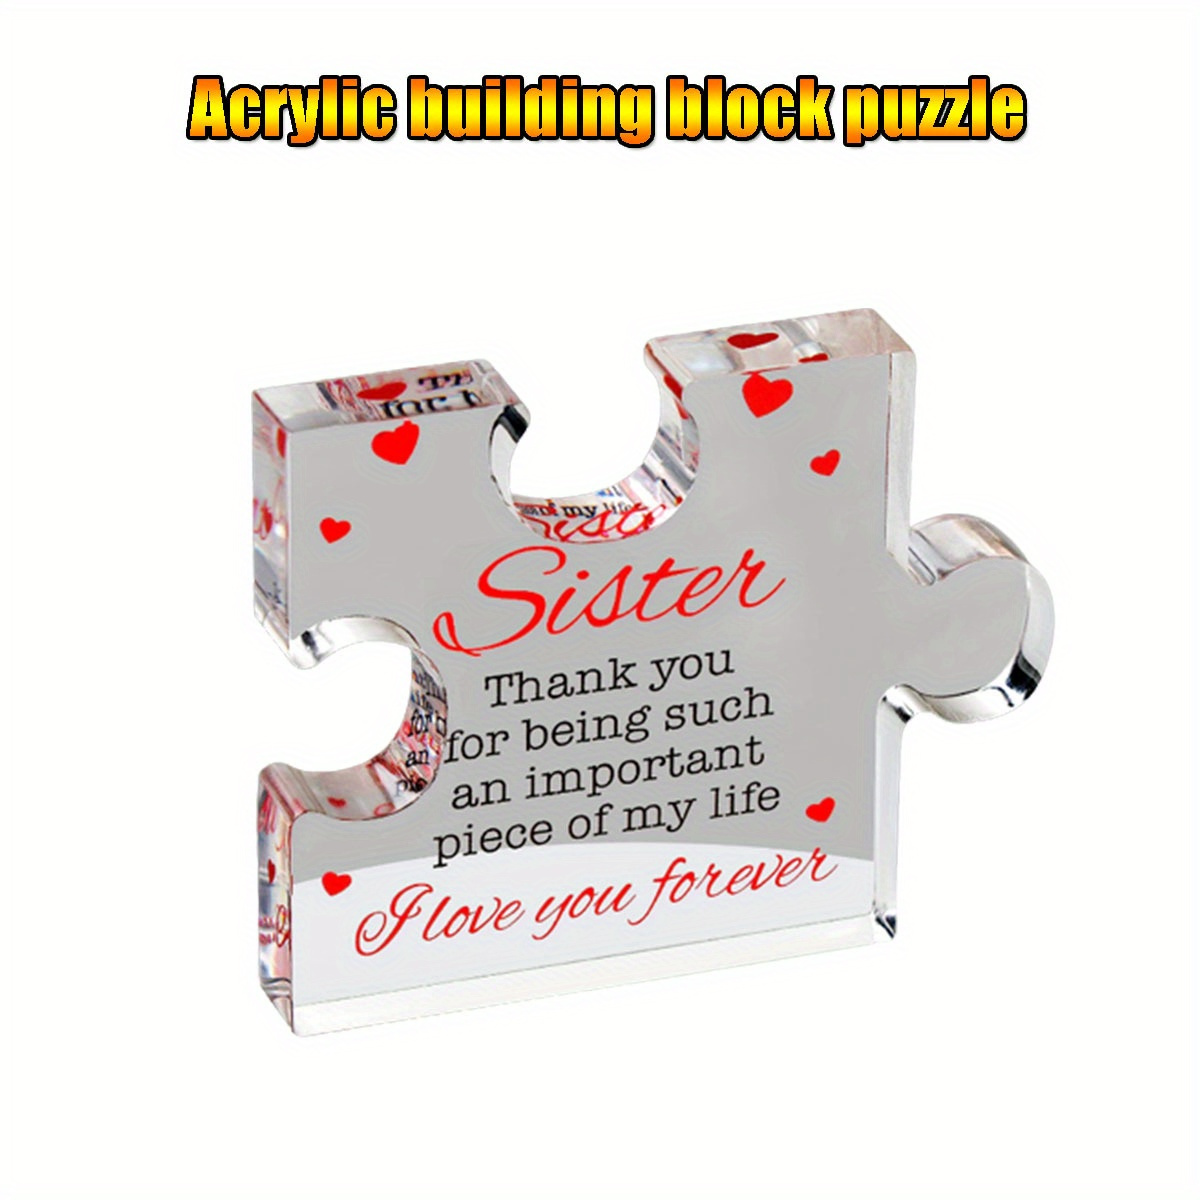 1 Piece Of Carved Acrylic Building Blocks Puzzle - Perfect Birthday Gift  For Sisters - Cute And Unique Home Decoration, Room Decoration And Office  Dec